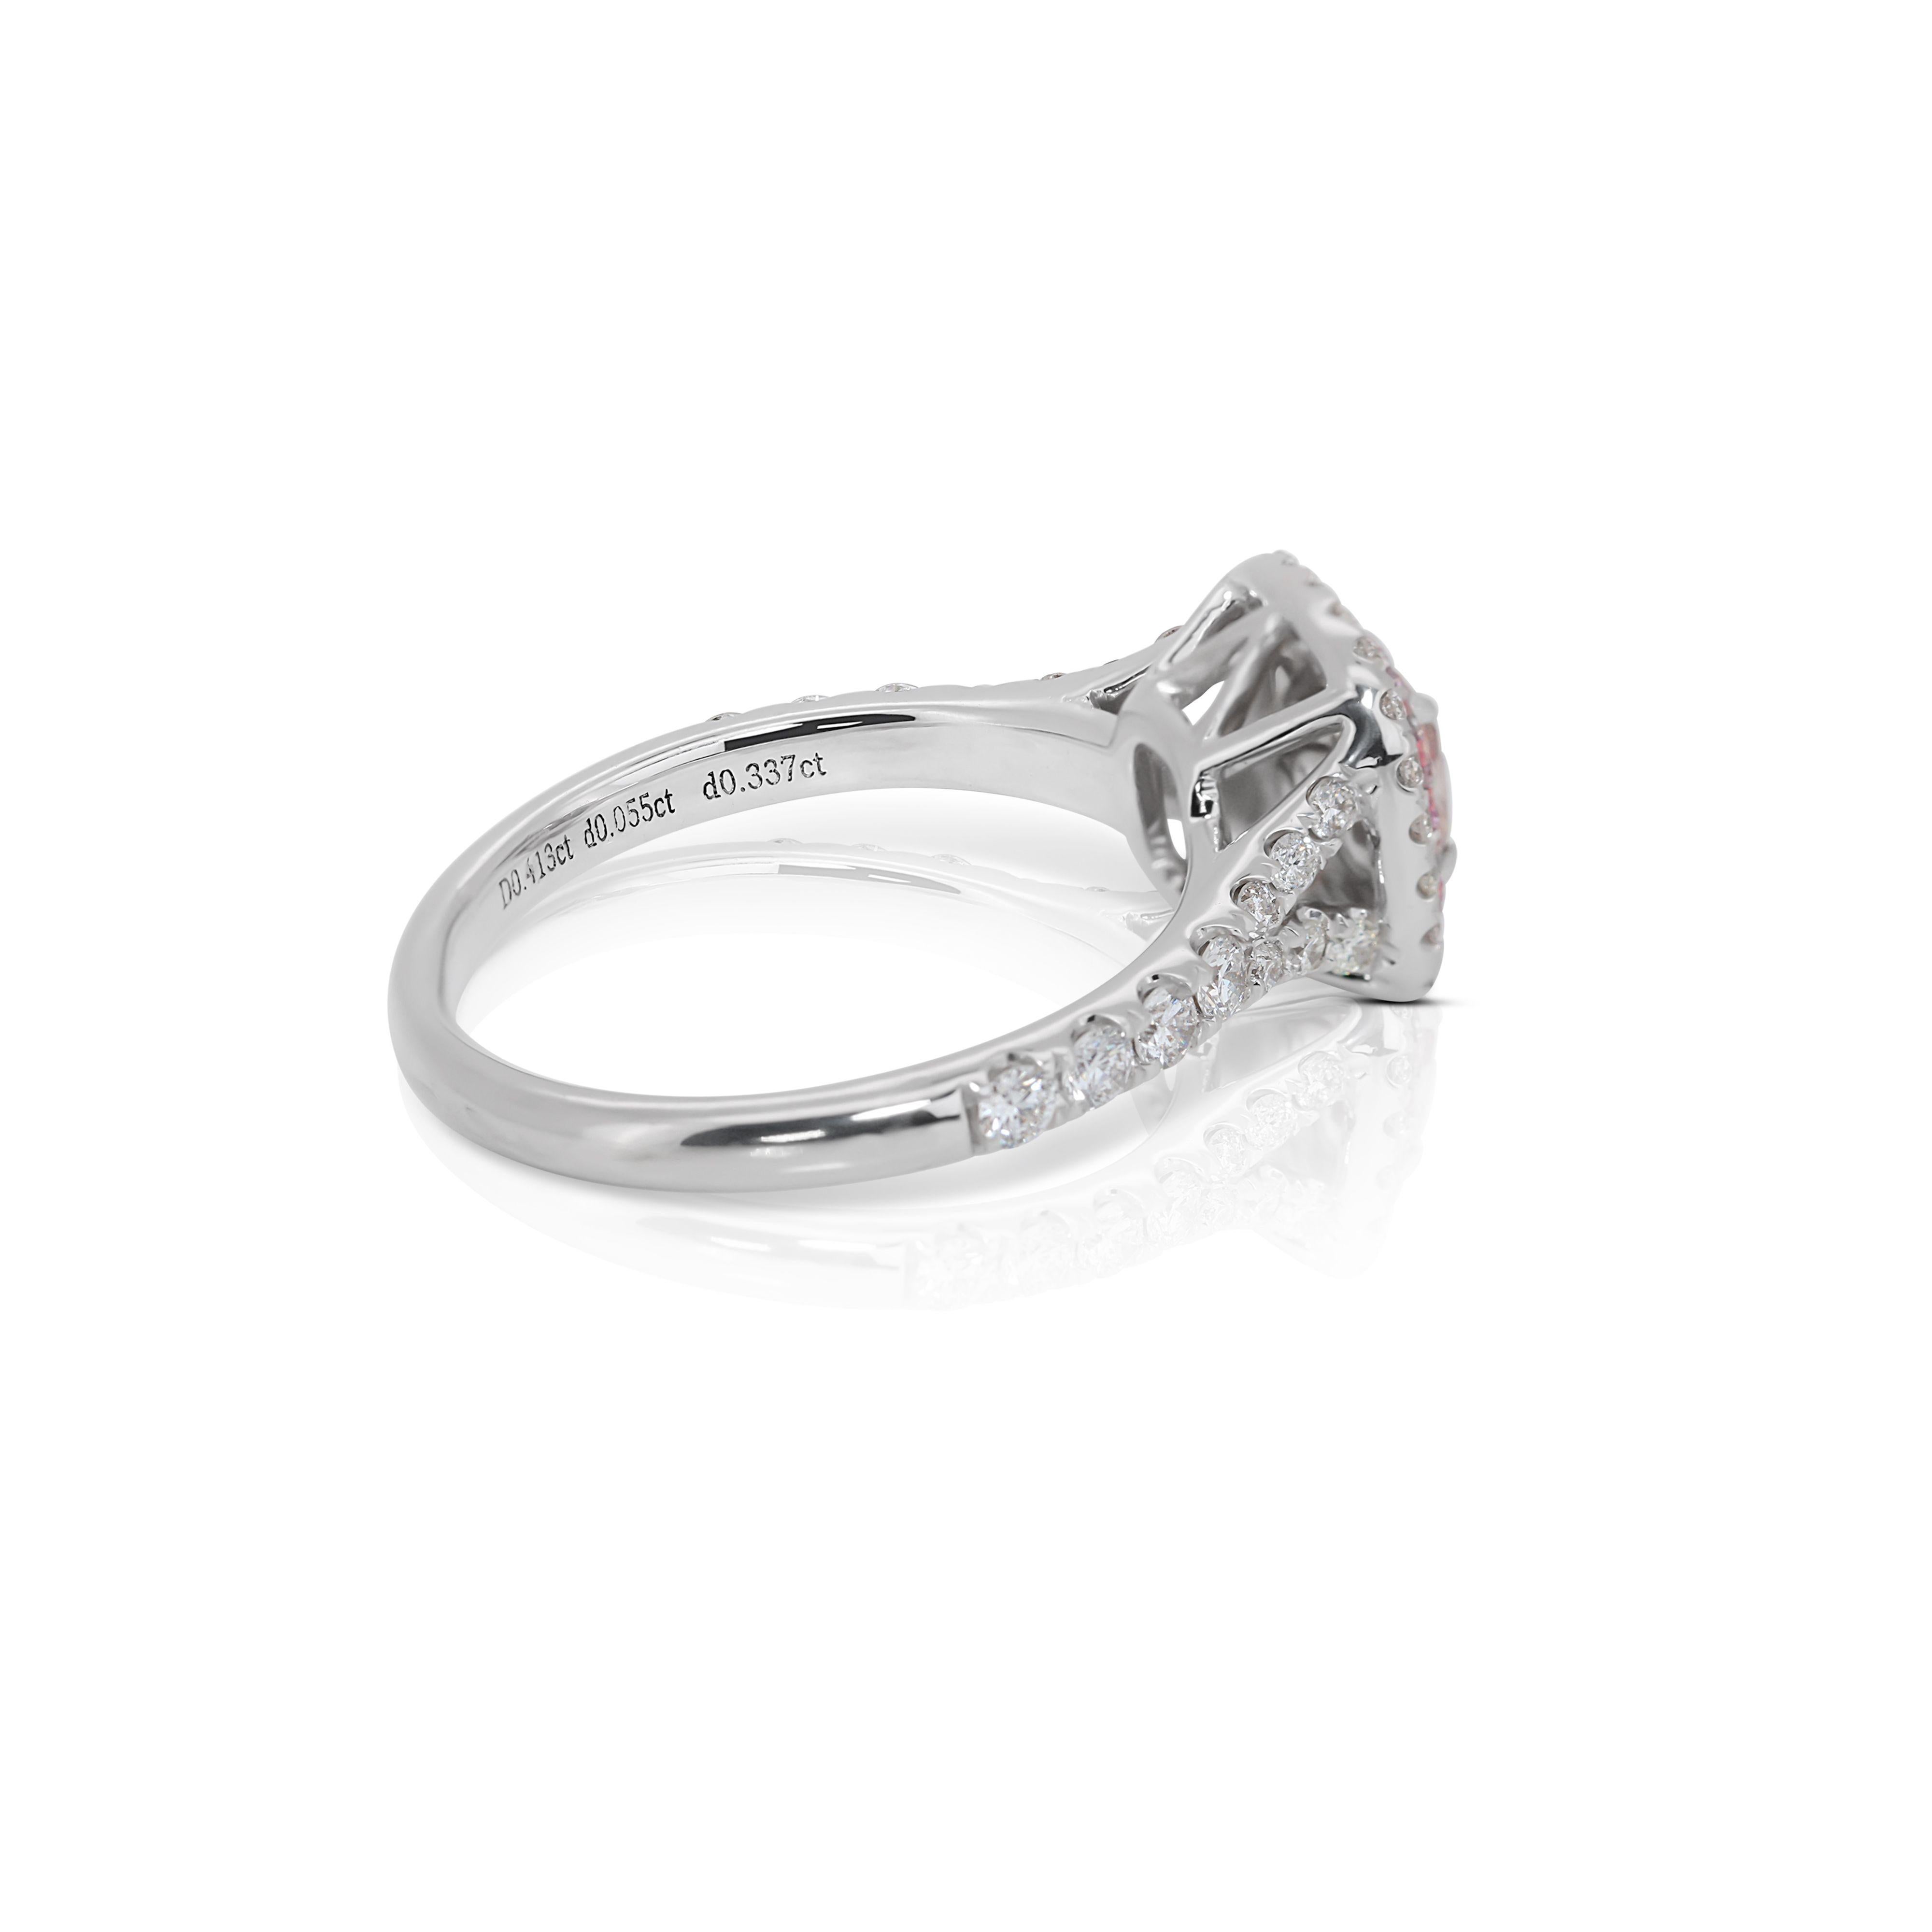 Exquisite 0.79ct Diamond Halo Ring in 18K White Gold For Sale 2